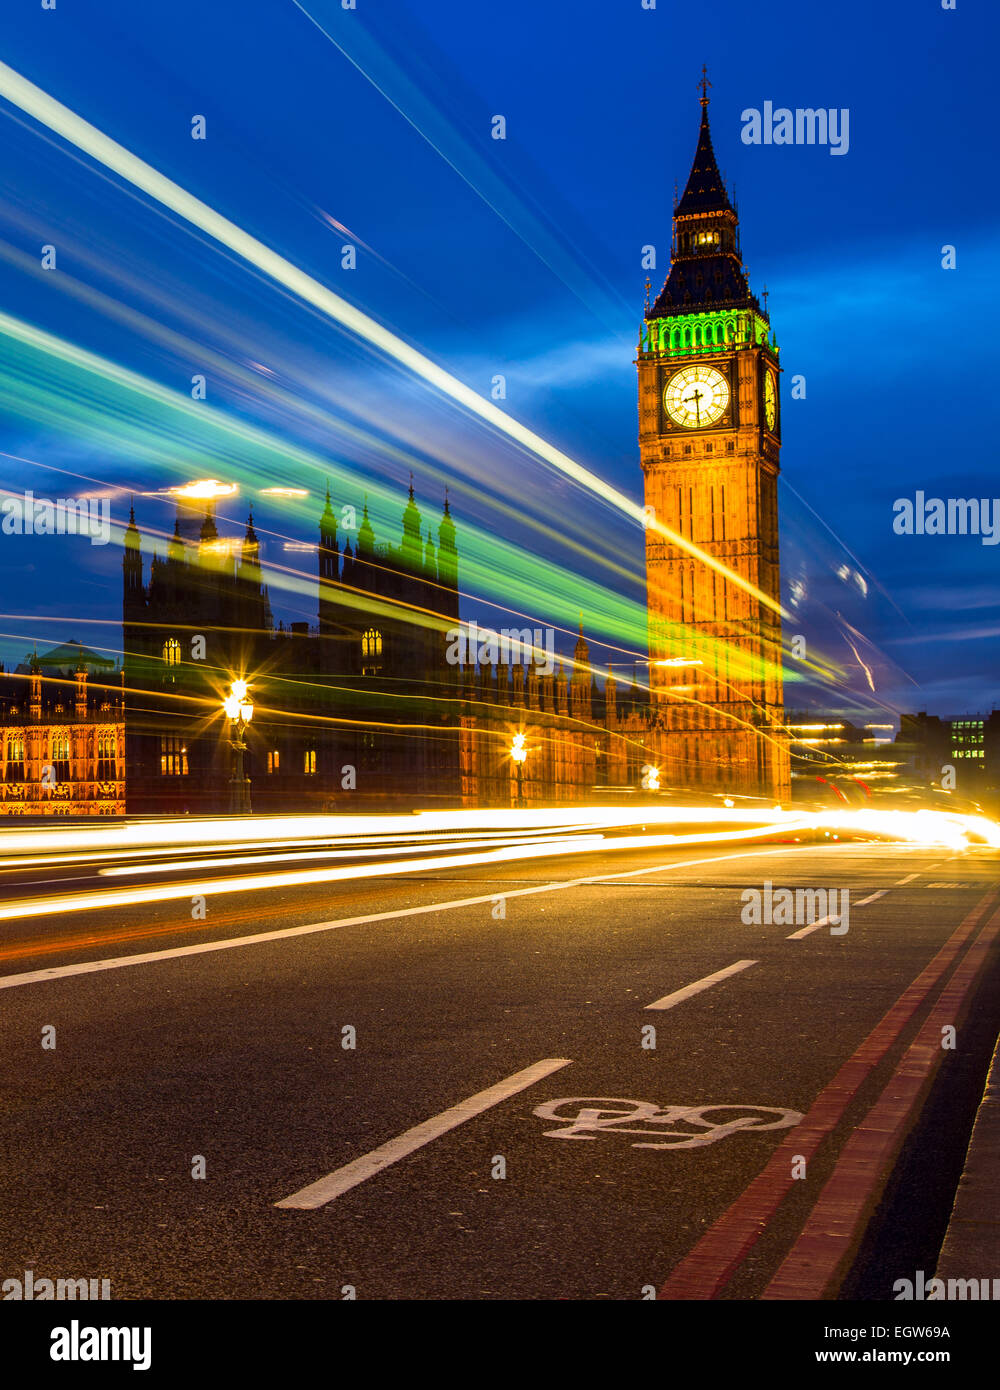 The Houses of Parliament and Big Ben at night Stock Photo